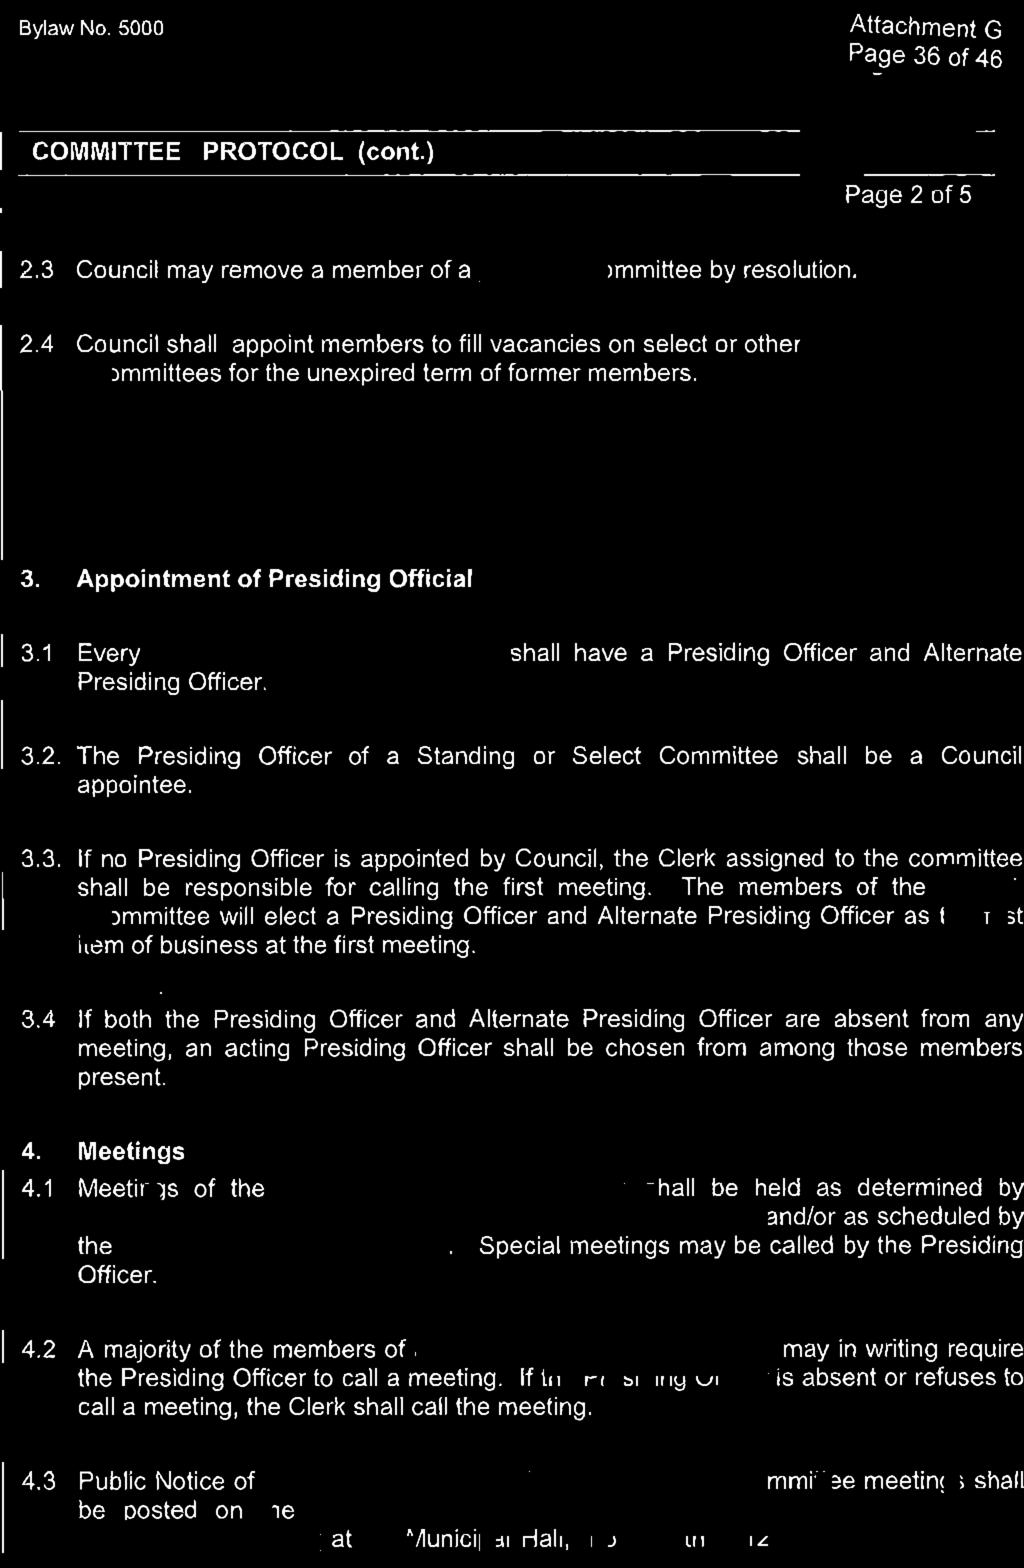 Bylaw No. 5000 Attachment G Page 36 of 46 COMMITTEE PROTOCOL (cont.) ~dment Dl 6137, 2003 SCHEDULE D Page 2 of 5 2.3 Council may remove a member of a Council Csommittee by resolution. ' 2.